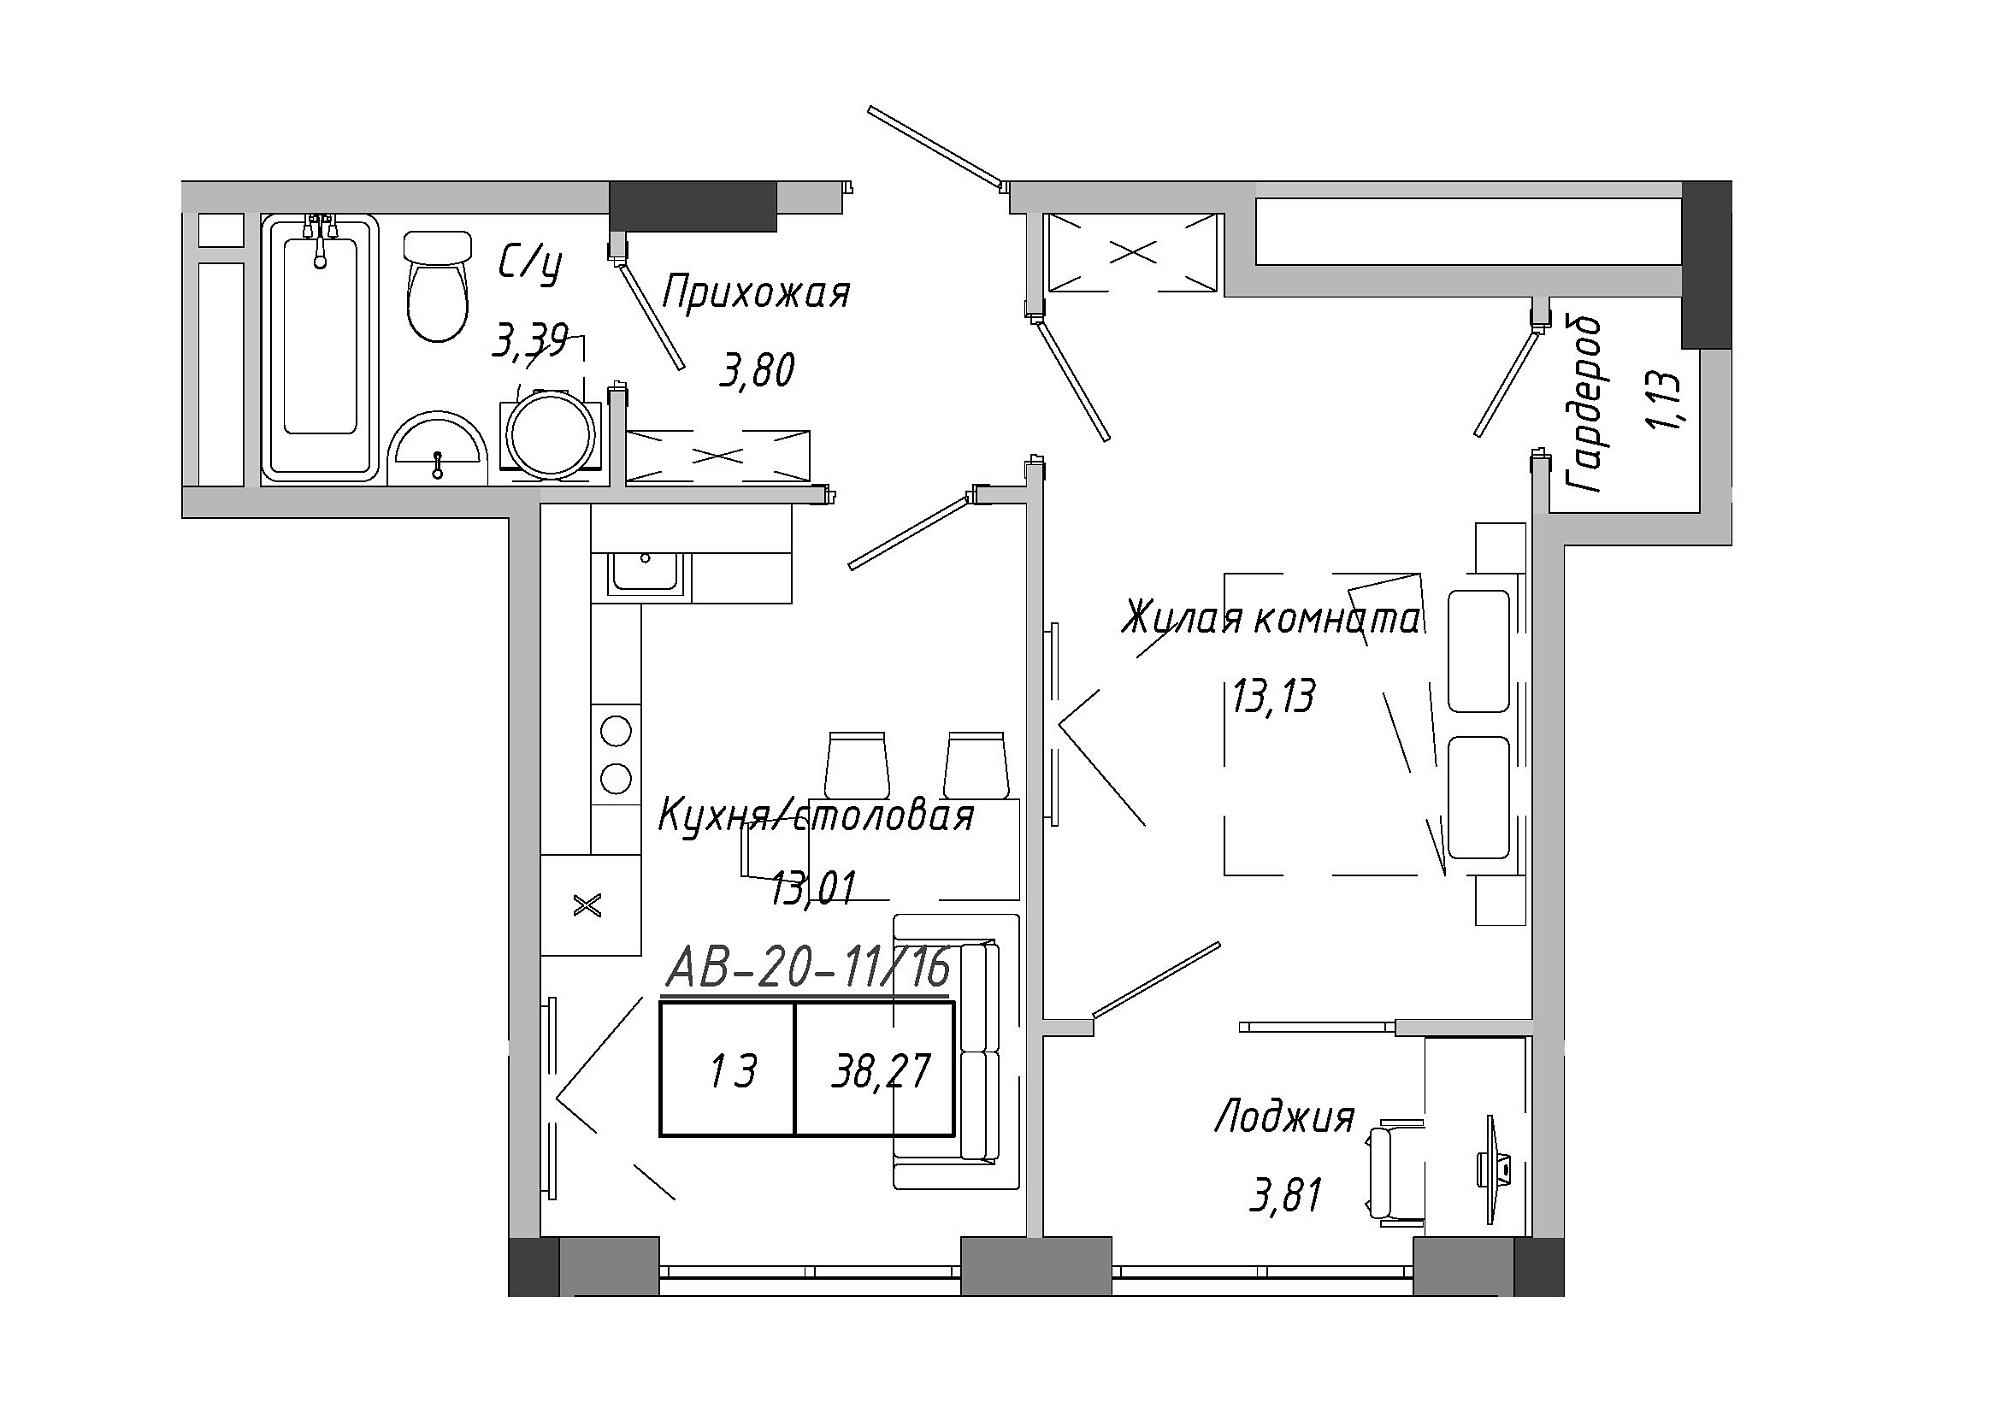 Planning 1-rm flats area 38.79m2, AB-20-11/00016.